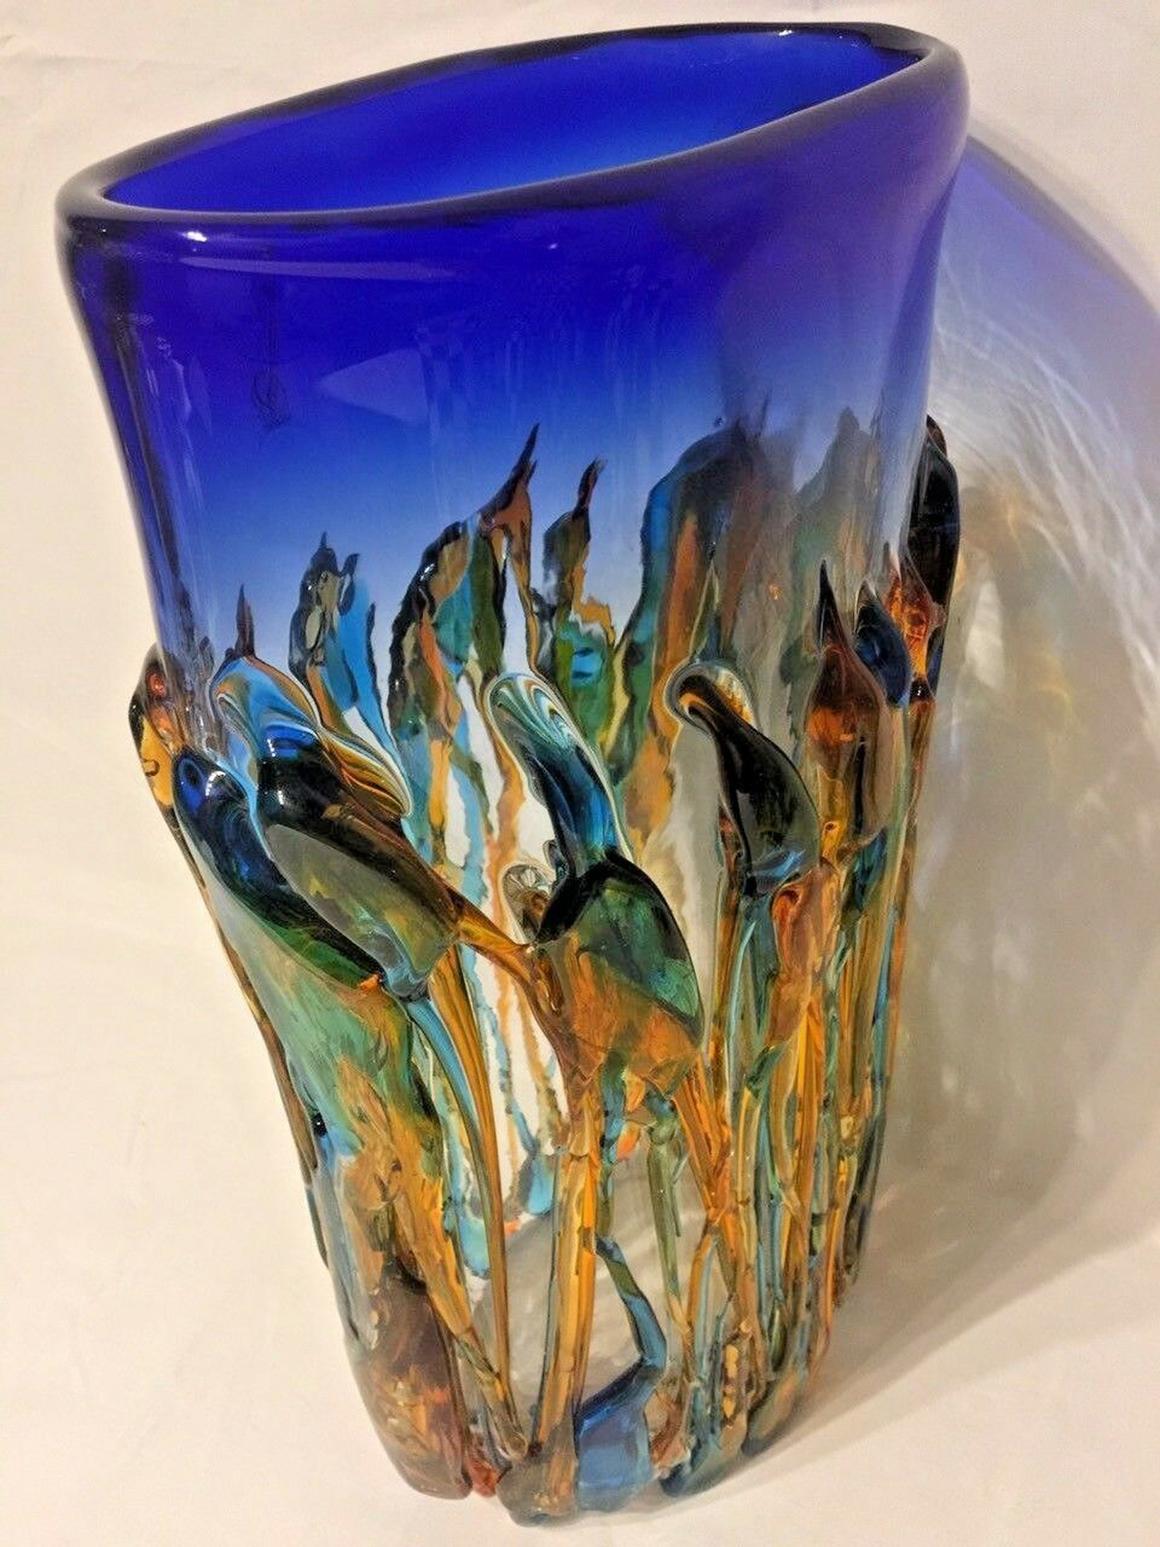 Beautifully designed large Murano Oceanos Vetro Artistico art glass vase with striking colors featuring glowing threads of blue, green, and amber glass, signed and numbered, measuring approximately 14.38 inches tall x 8.5 inches wide top quality